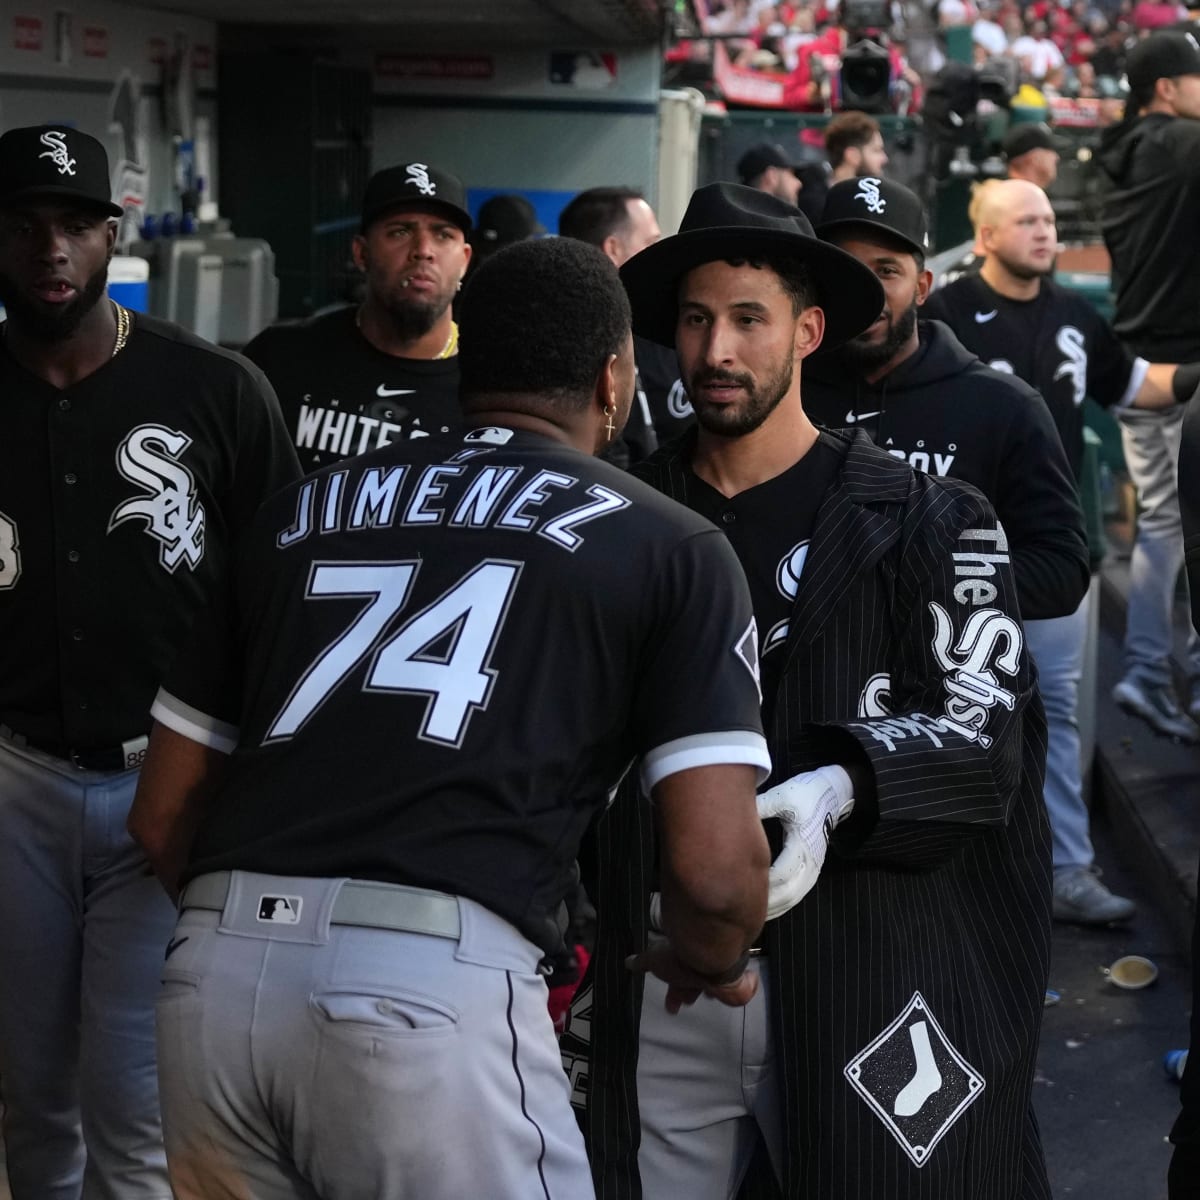 White Sox Weekly Minor League Update - South Side Sox